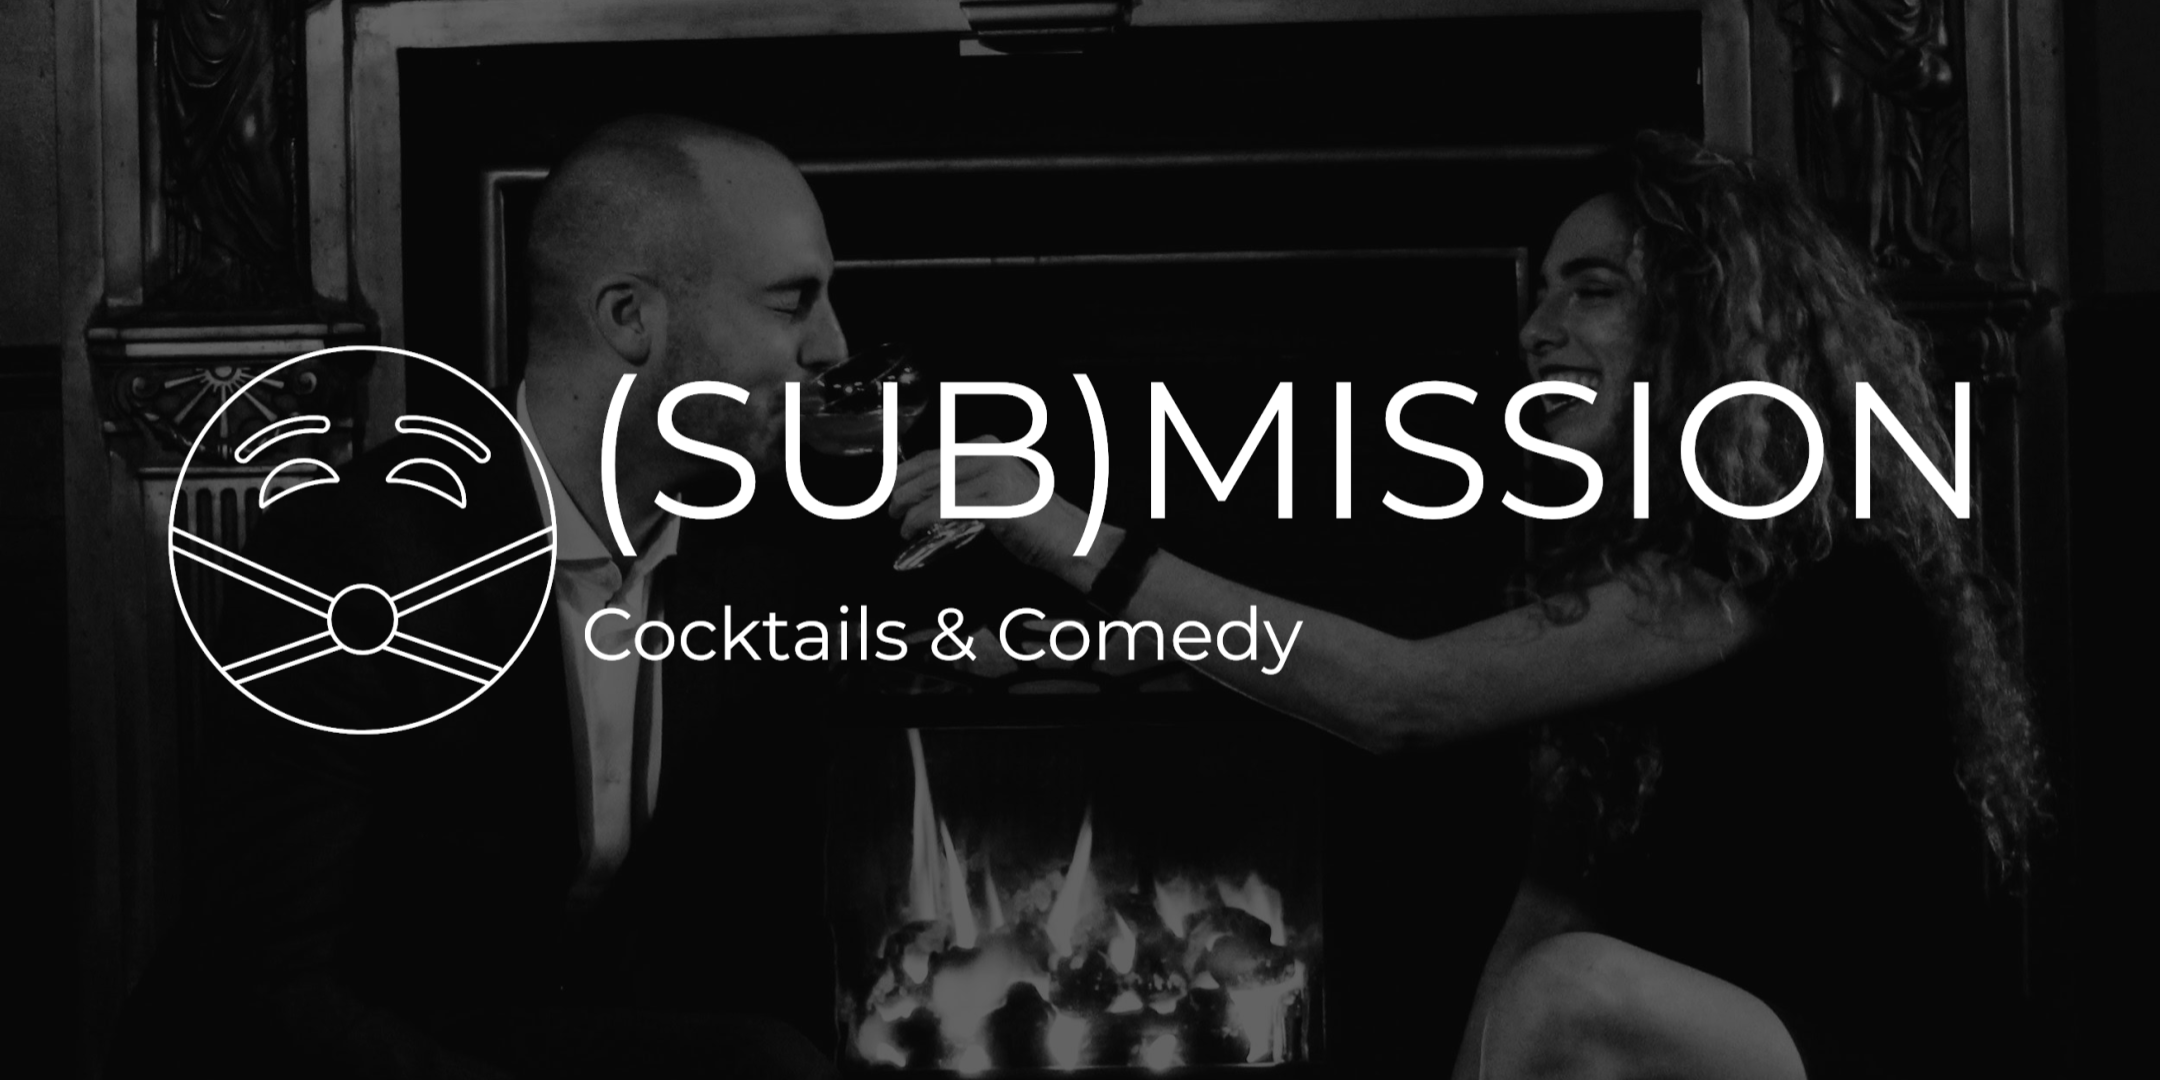 SUBMISSION: Cocktails & Comedy